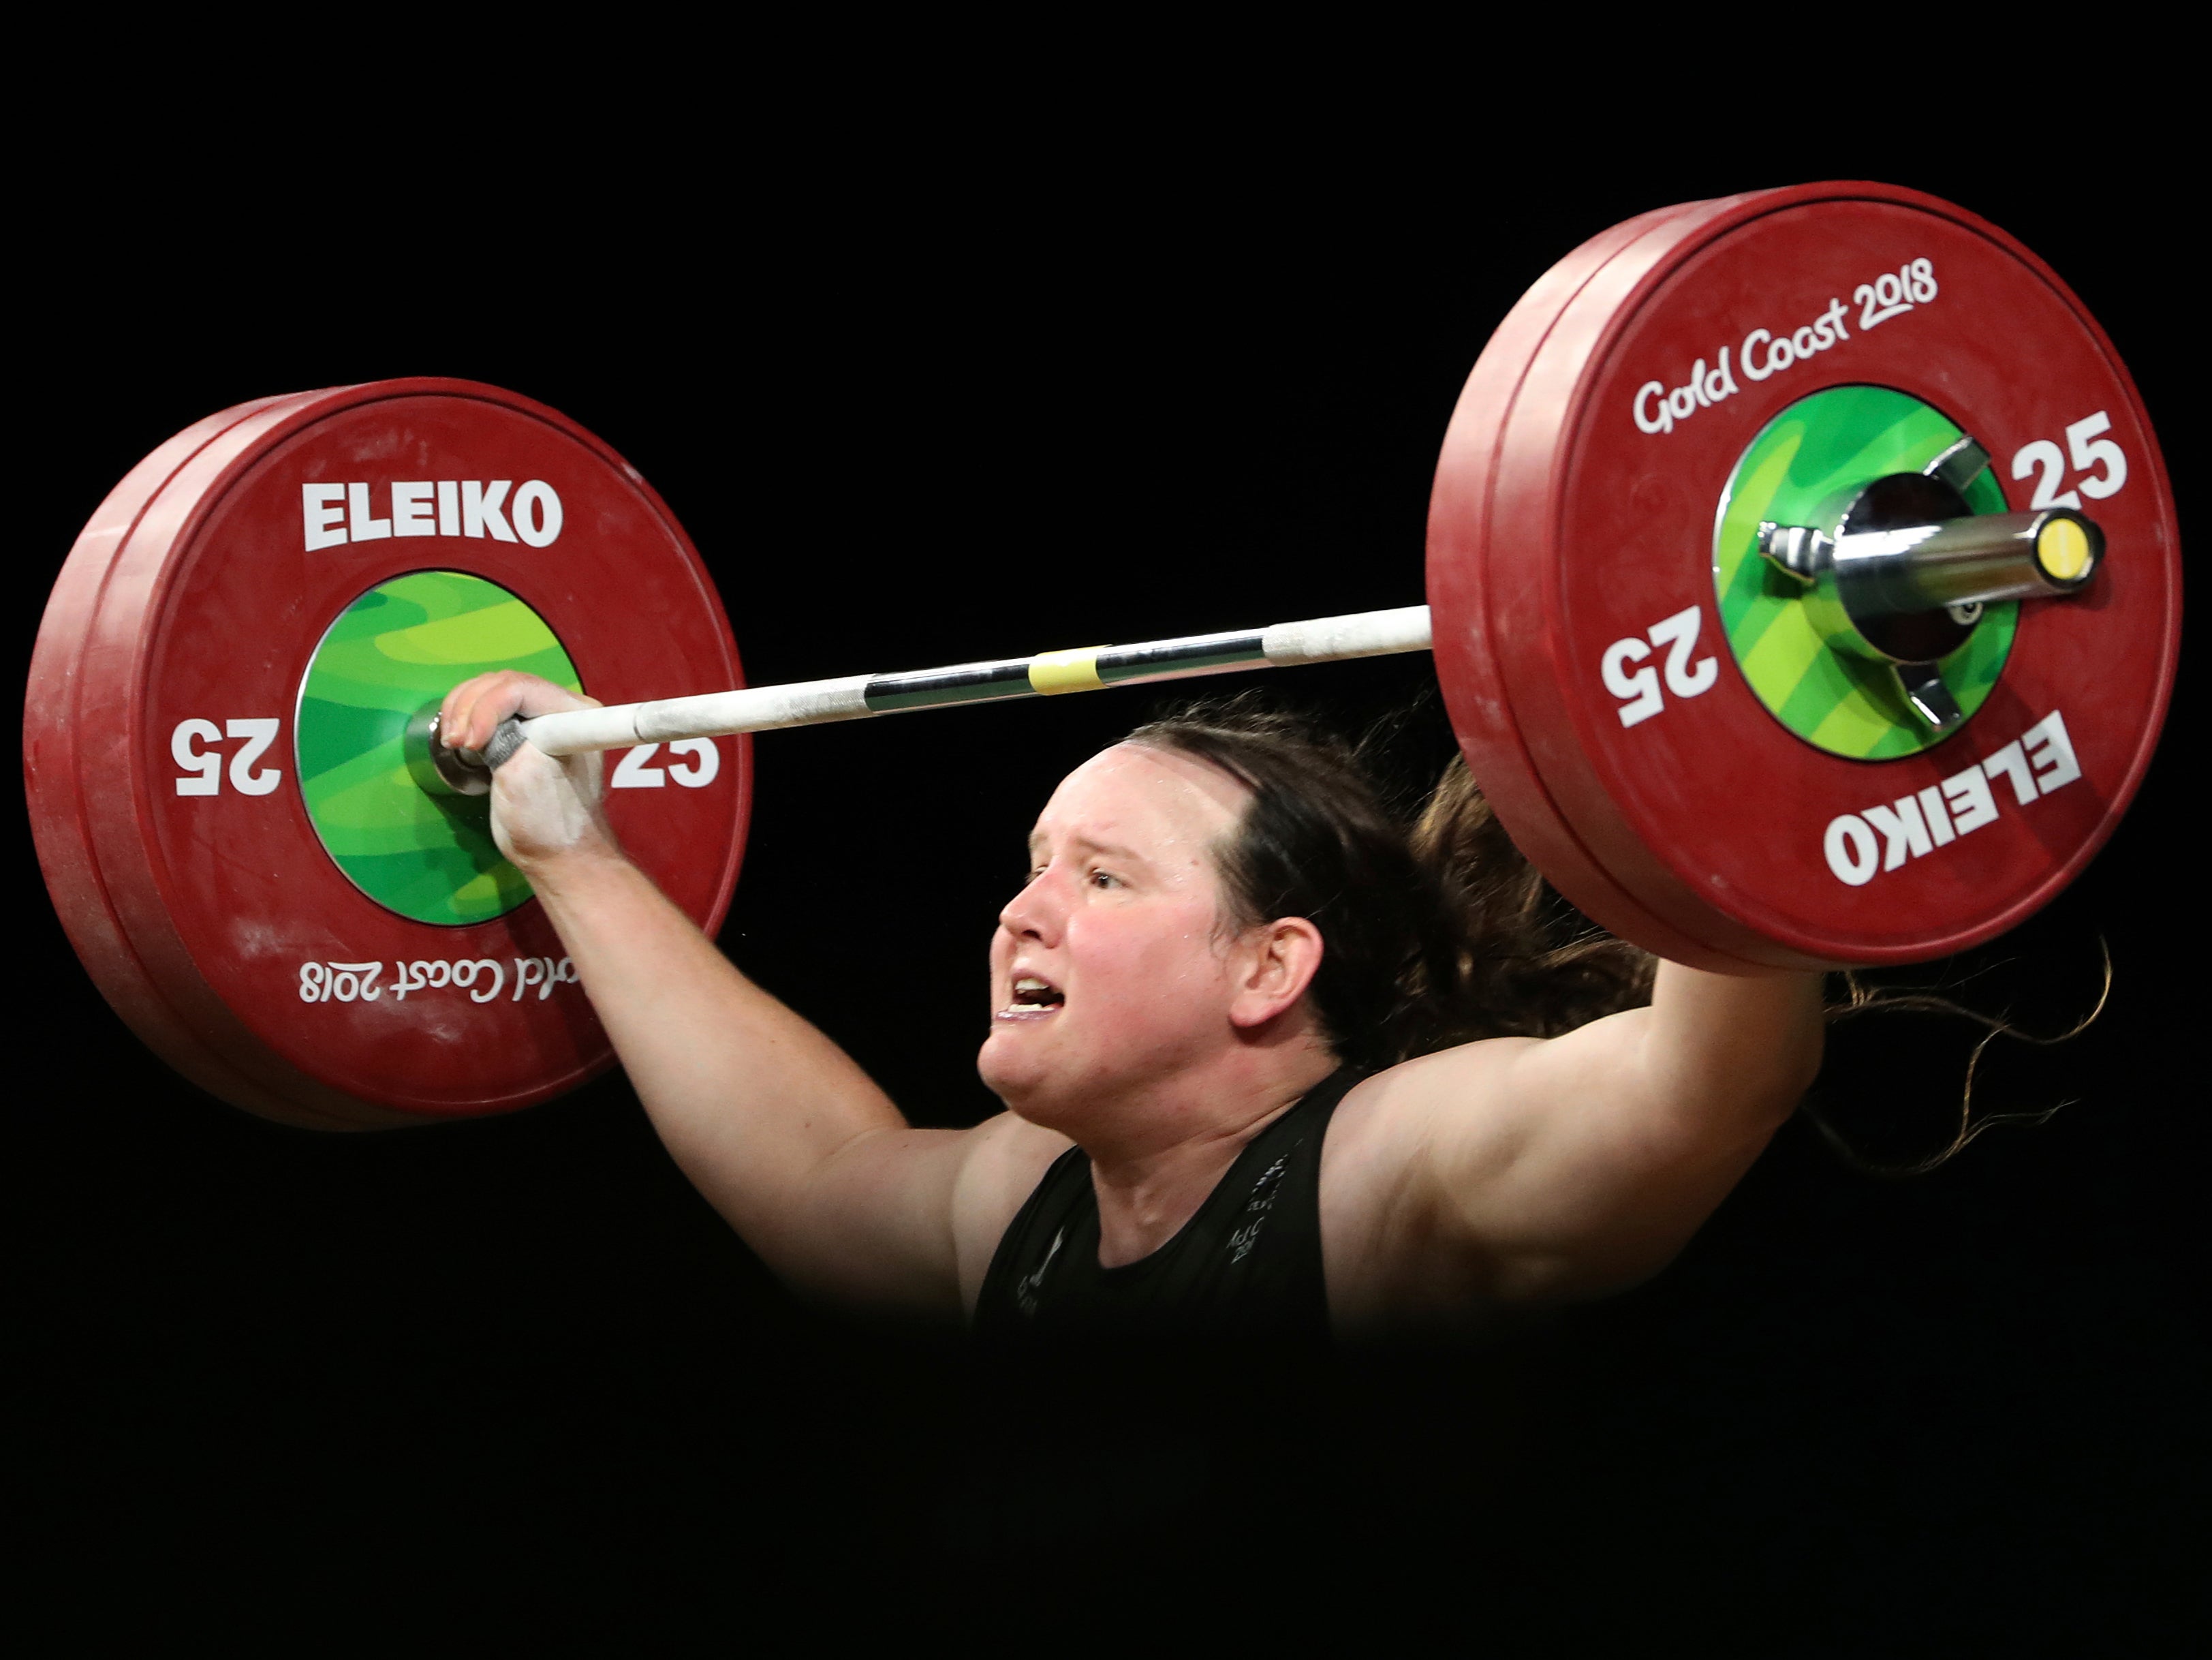 New Zealand's Laurel Hubbard lifts in the snatch of the women's 90kg weightlifting final at the 2018 Commonwealth Games on the Gold Coast, Australia